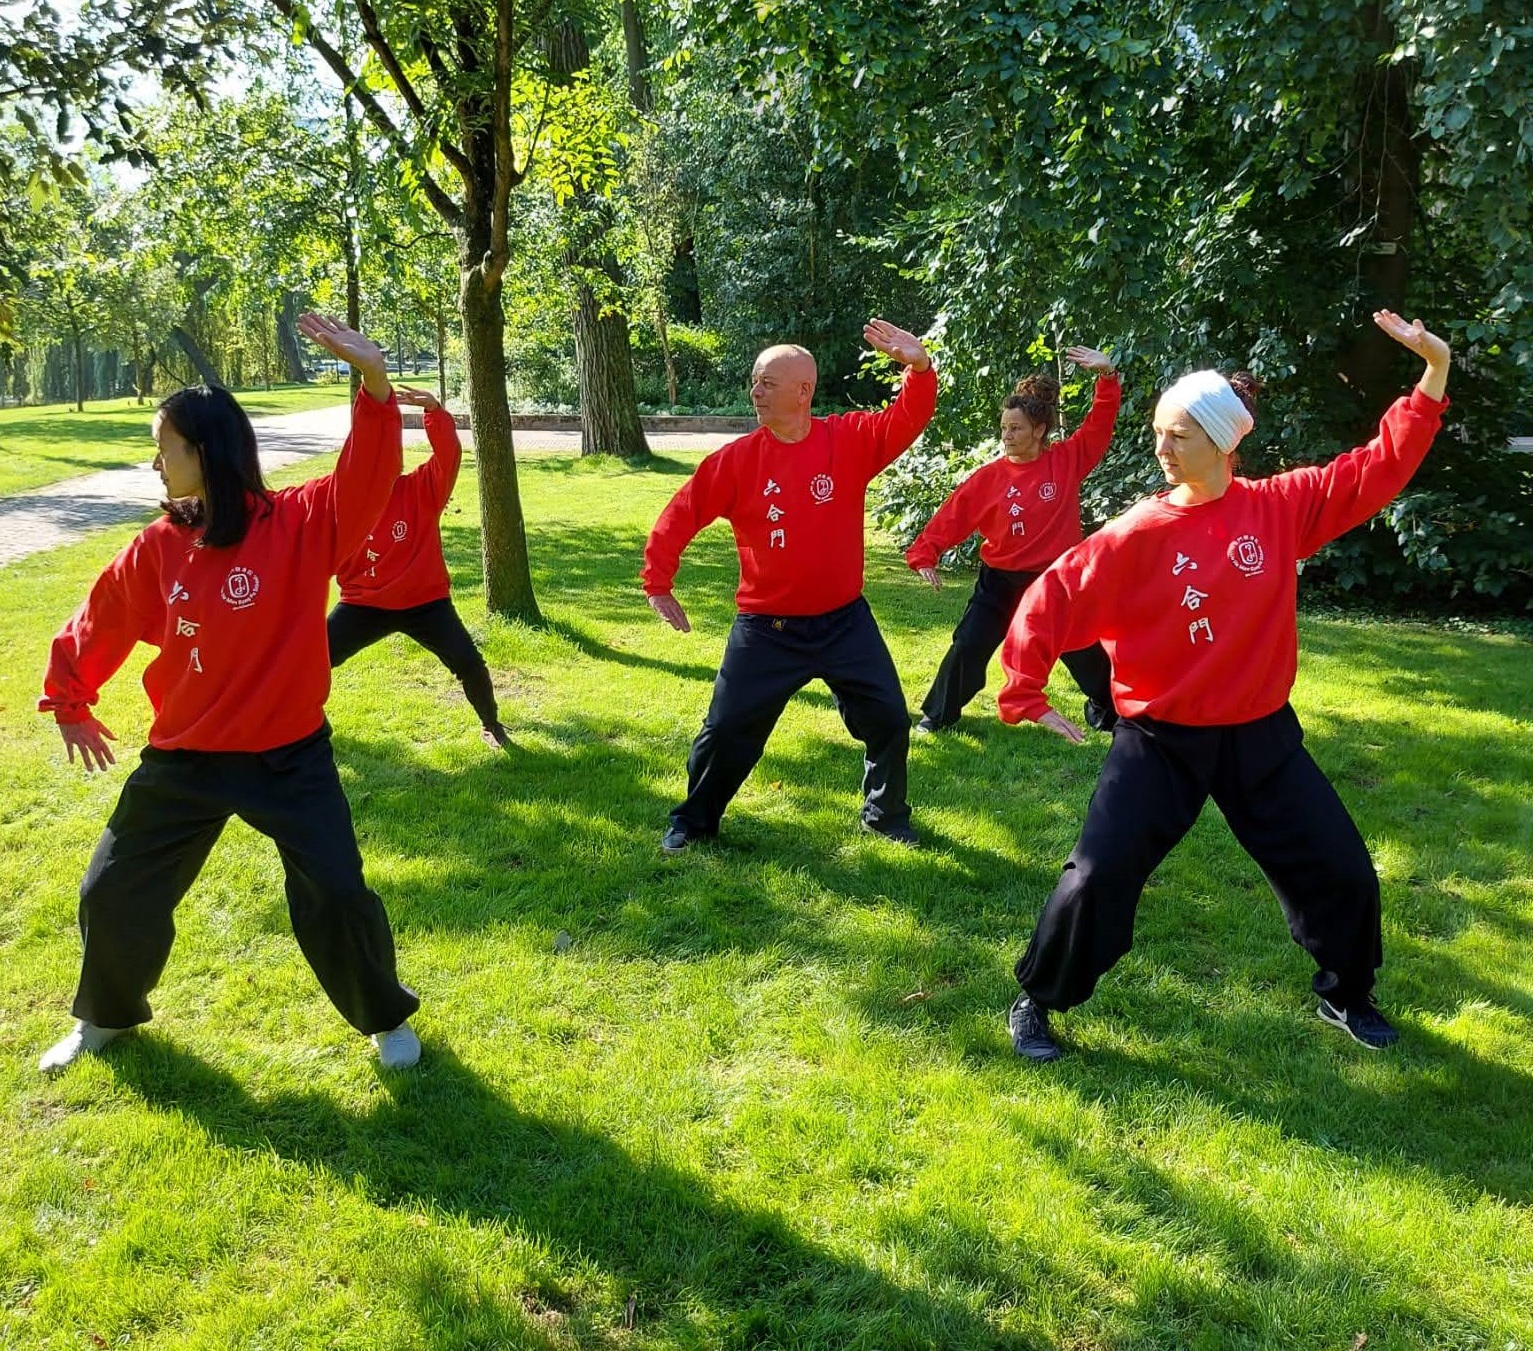 Internal martial arts people training dressed in red at the park_